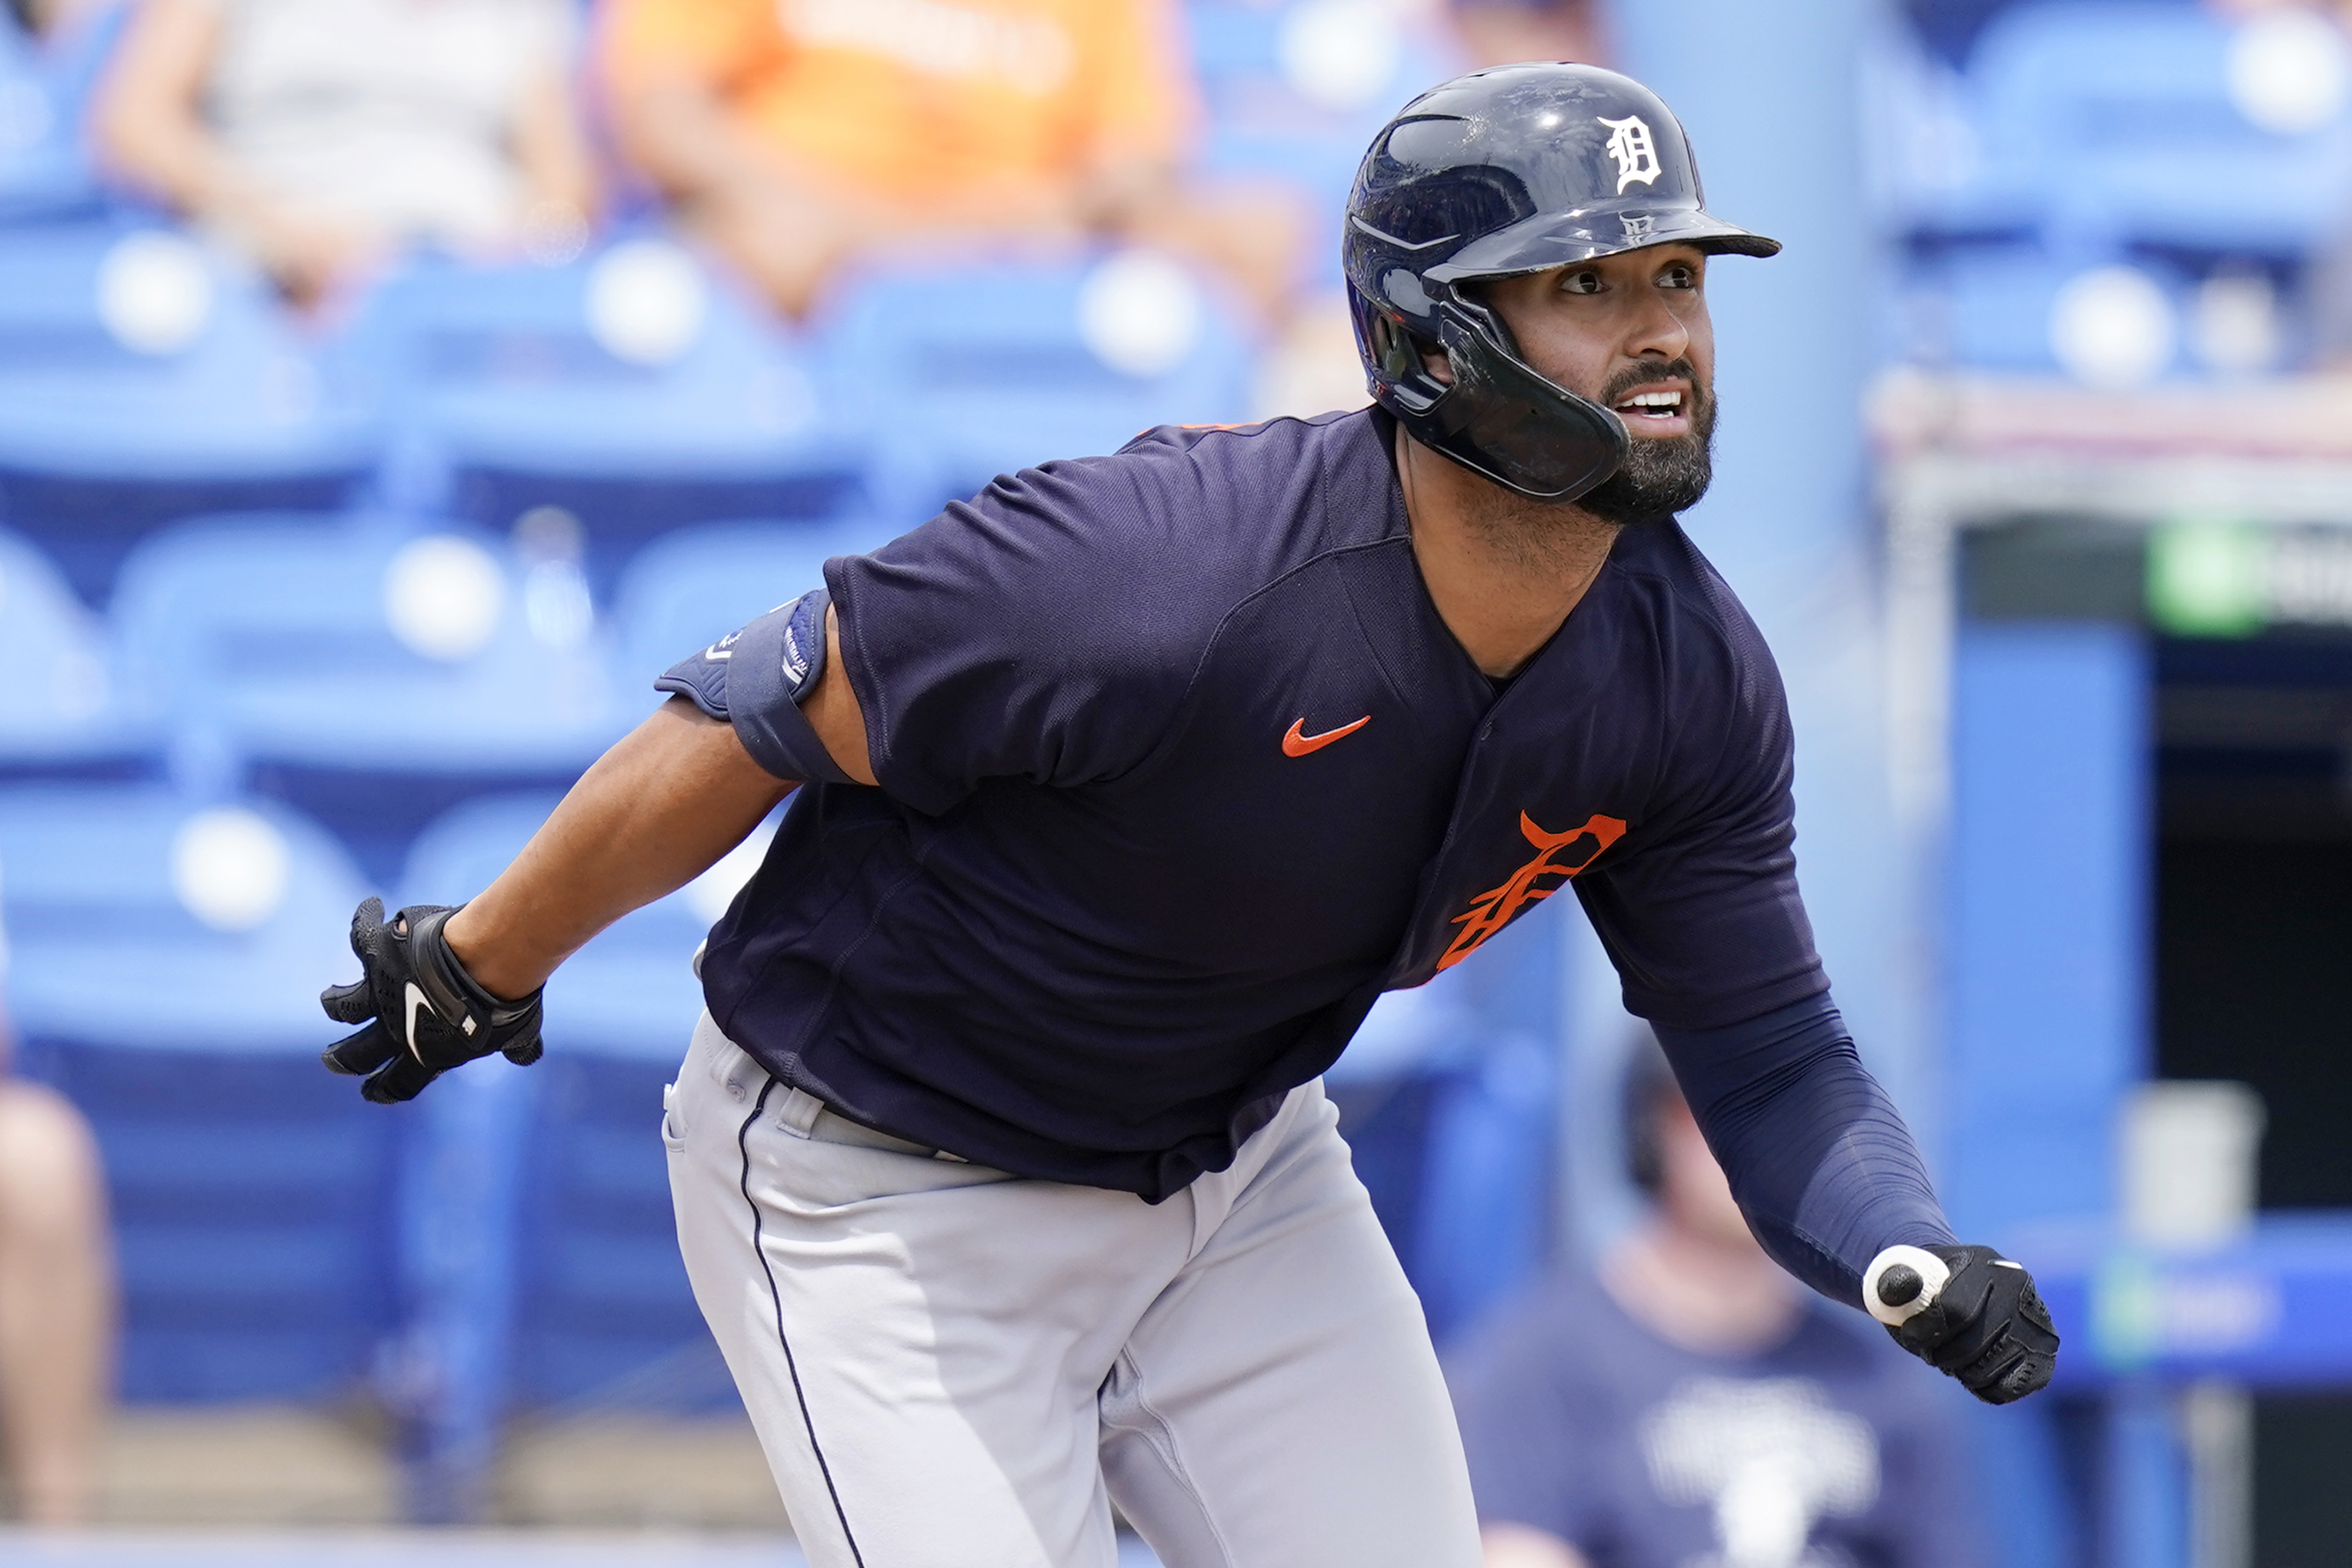 The latest on Tigers prospect Riley Greene 40 days after injury 